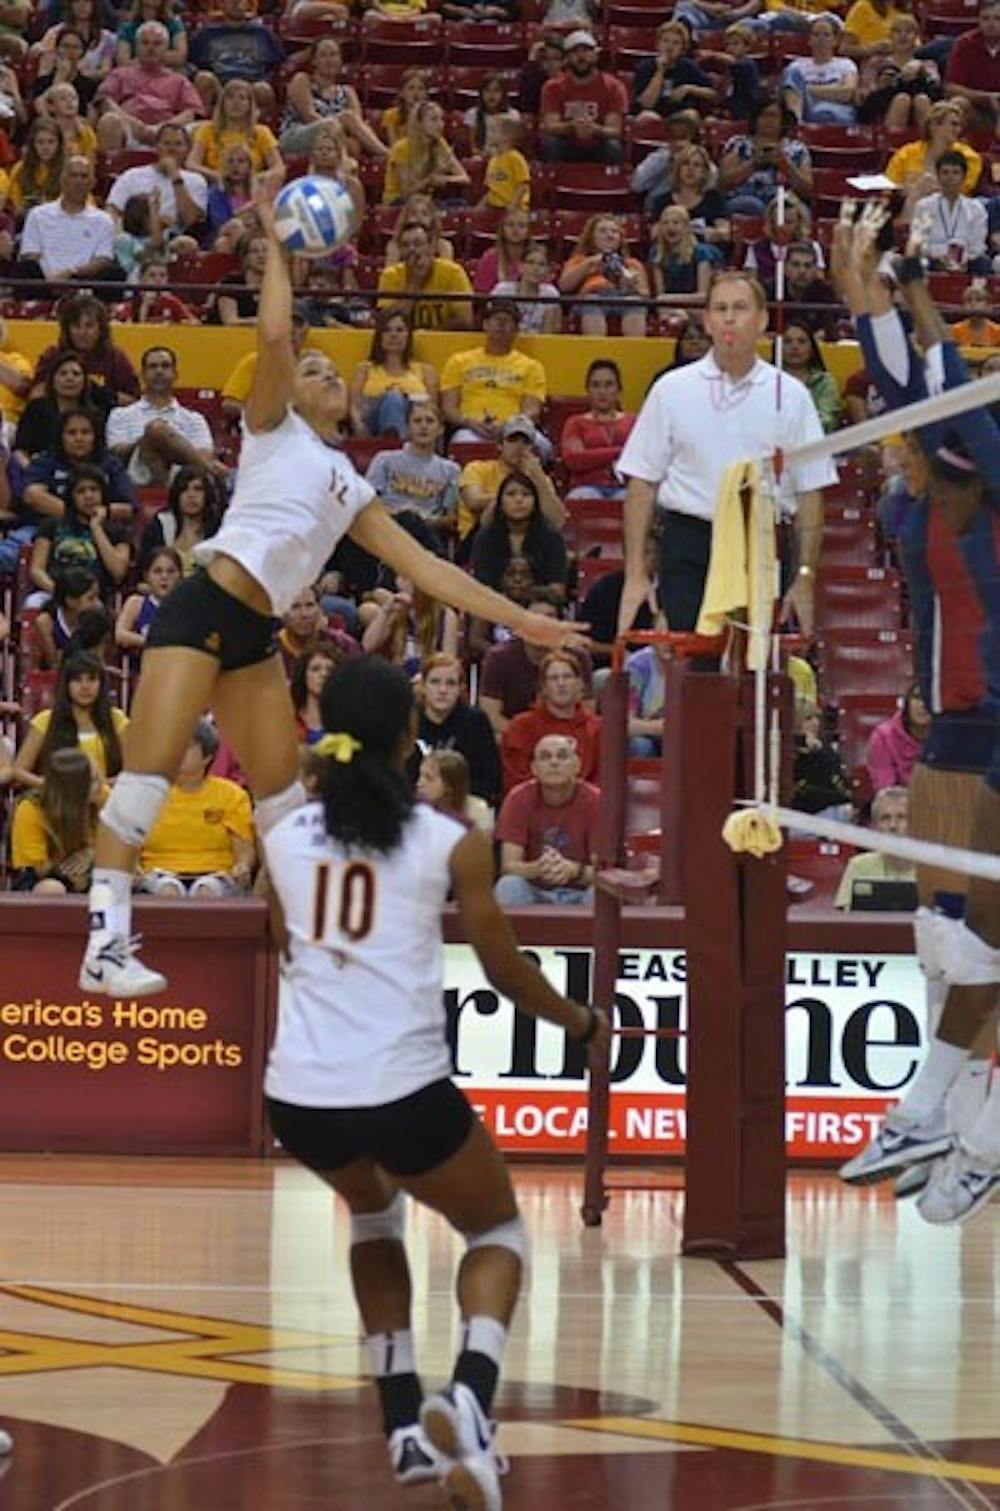 COMING DOWN: Senior outside hitter Sarah Reaves spikes a ball during a match earlier this season. With losses to UCLA and USC over the weekend, the ASU women's volleyball team was eliminated from postseason play. (Photo by Aaron Lavinsky)